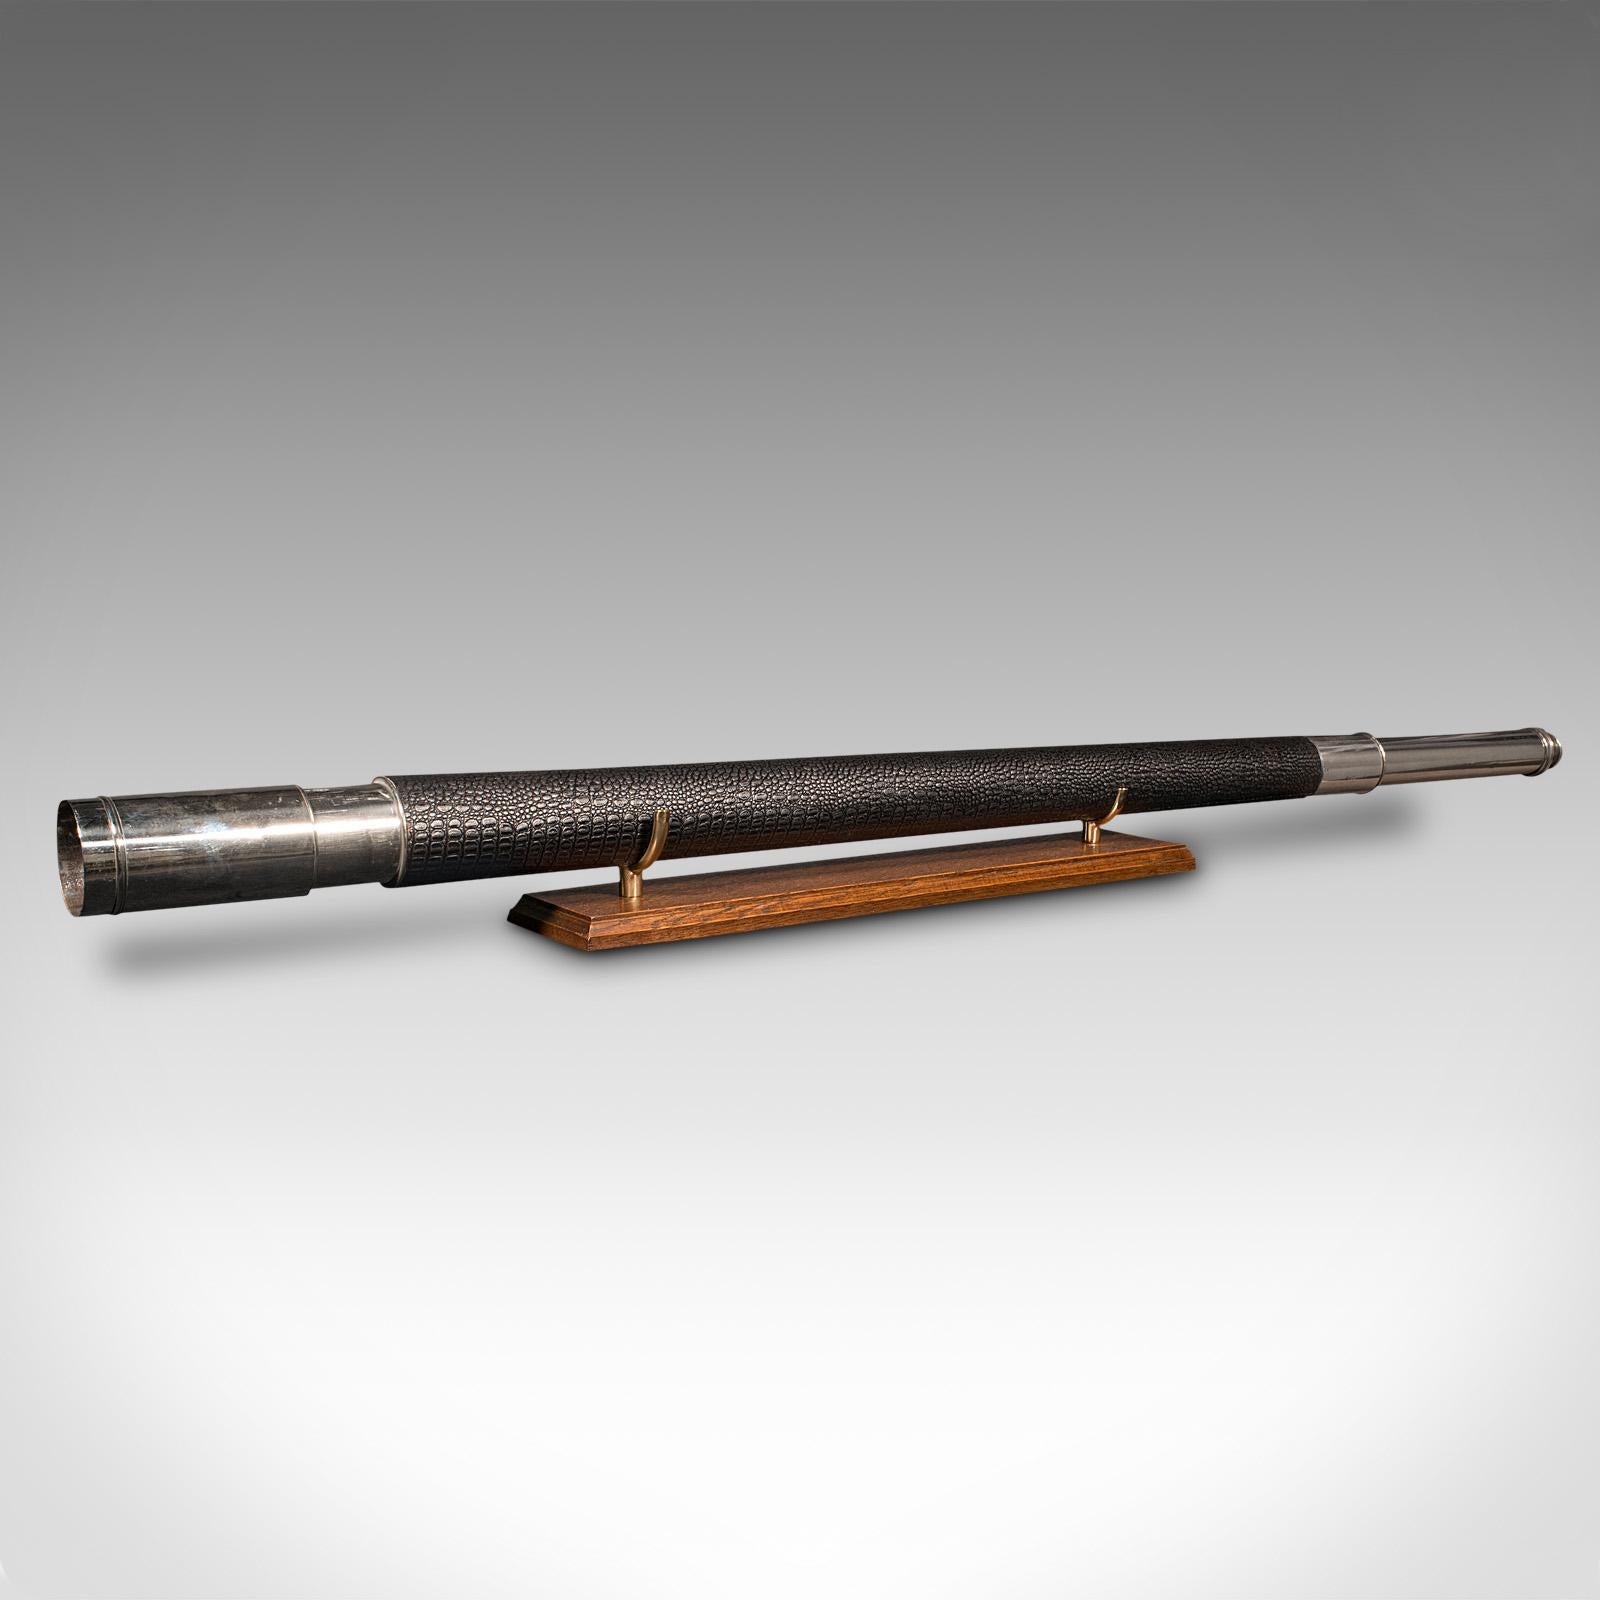 This is a long antique telescope. An English, silvered brass single draw refractor by Dennis of London, dating to the early Victorian period and later, circa 1850.

Perfect for bird watching, landscape appreciation, wildlife, or maritime